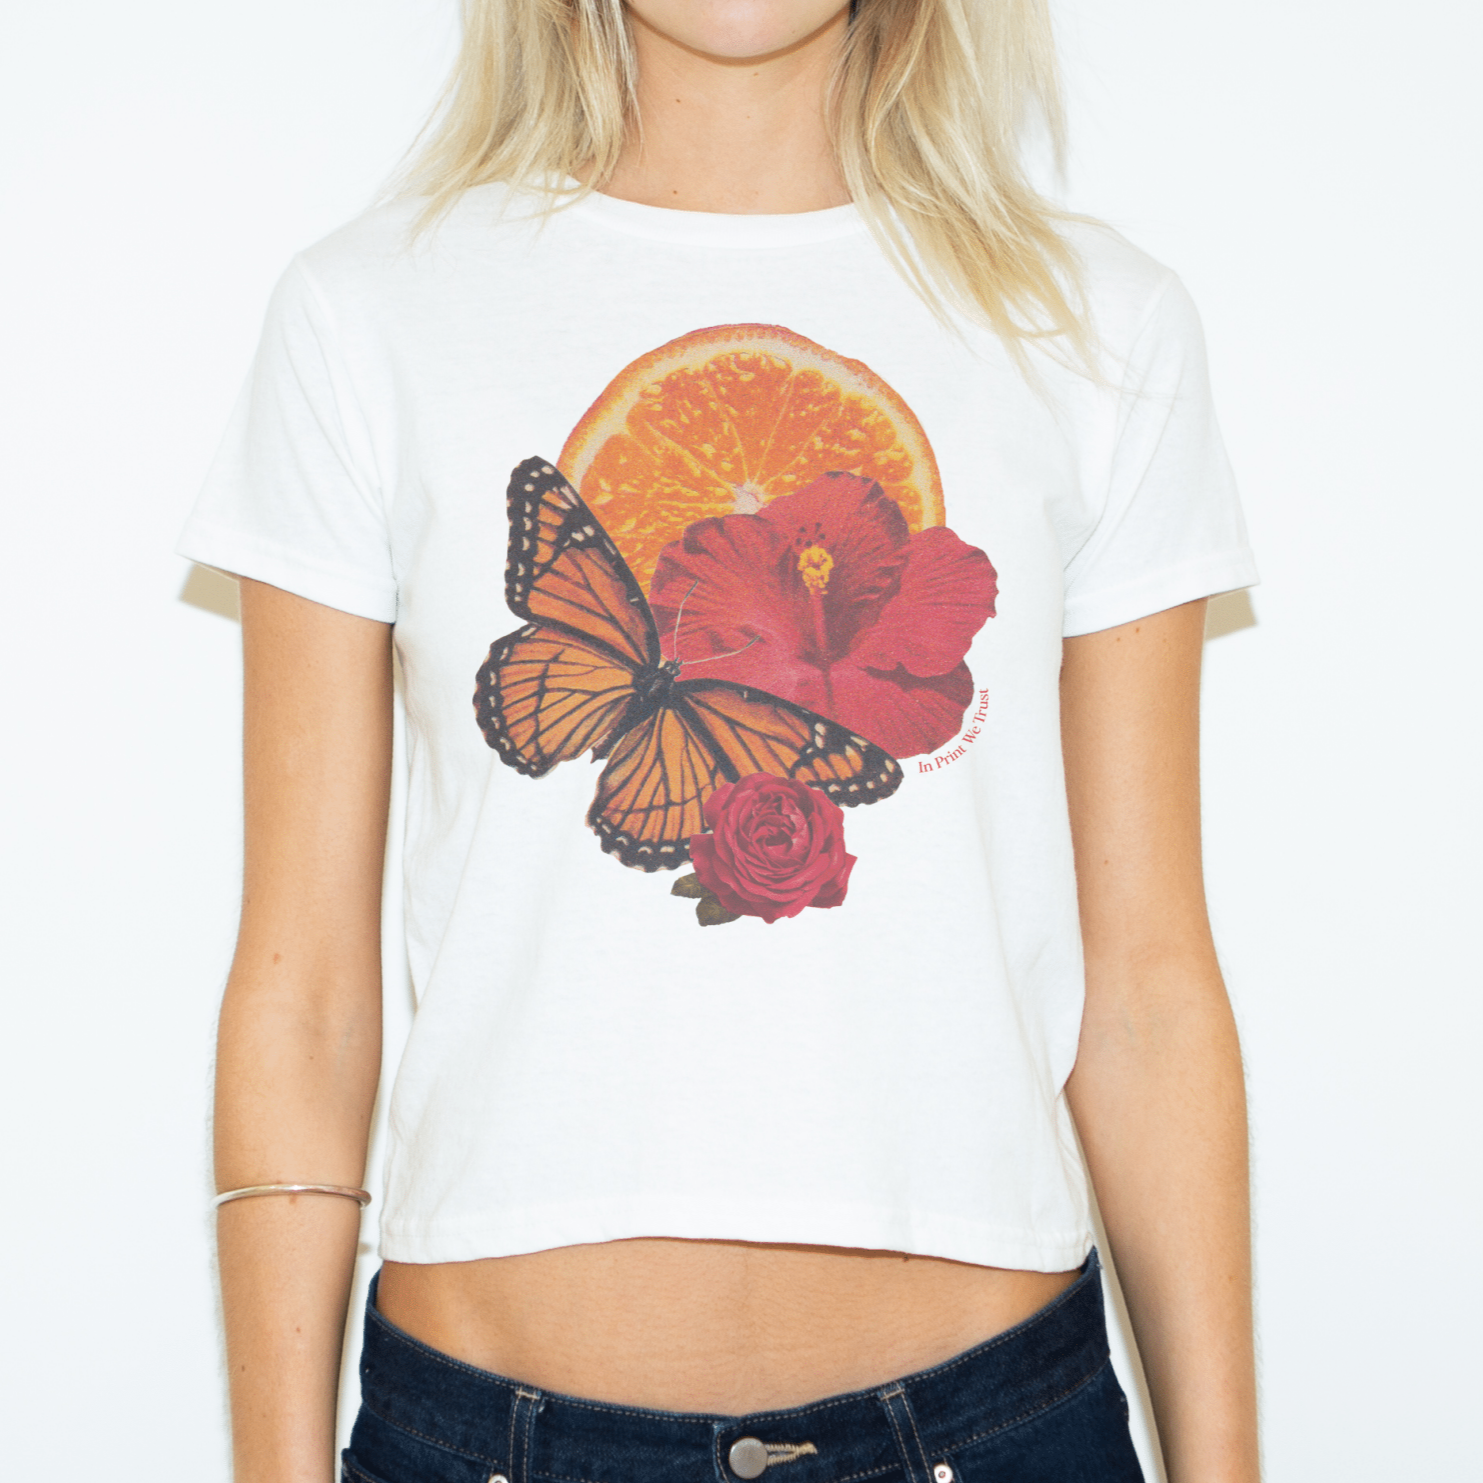 'Natural Beauty' baby tee - In Print We Trust